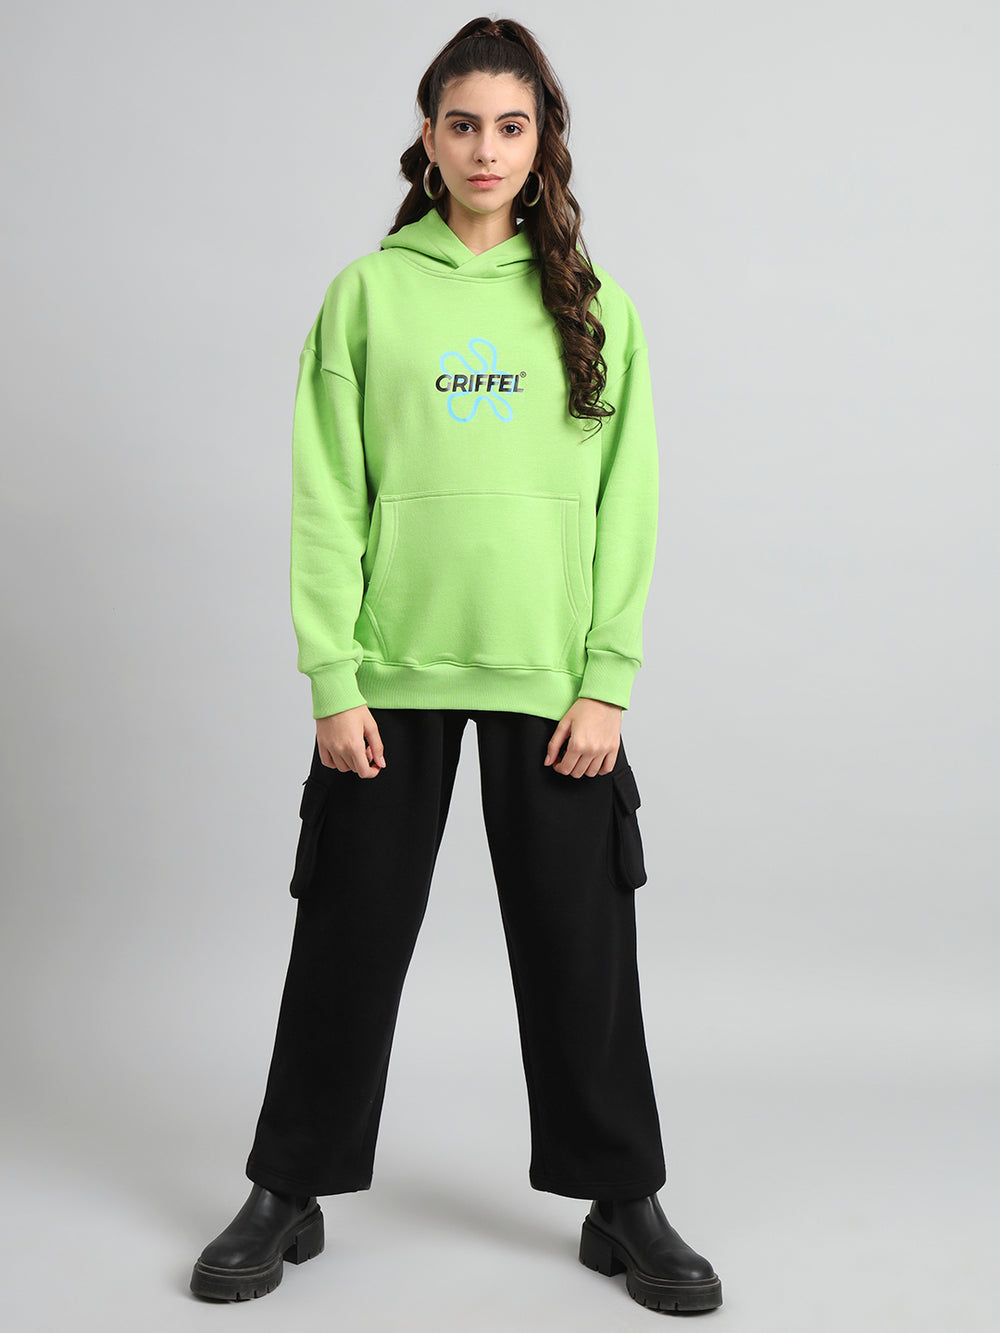 Griffel Women Oversized Fit No One Saves You Parrot 100% Cotton Fleece Hoodie and trackpant - griffel